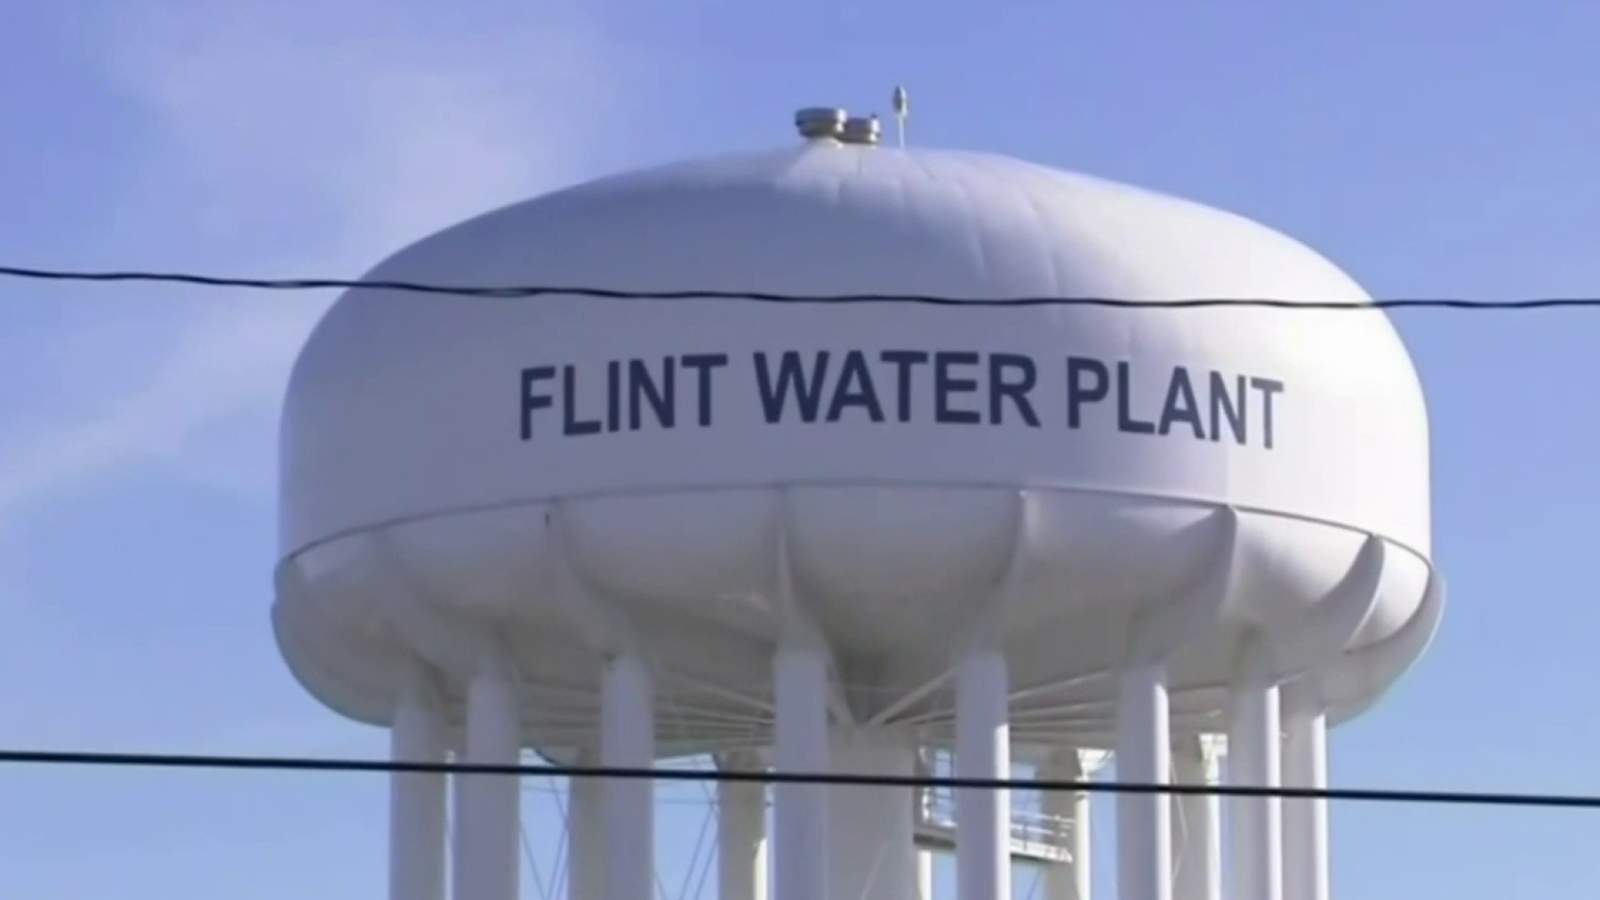 41 charges filed in Flint water crisis investigation, officials say